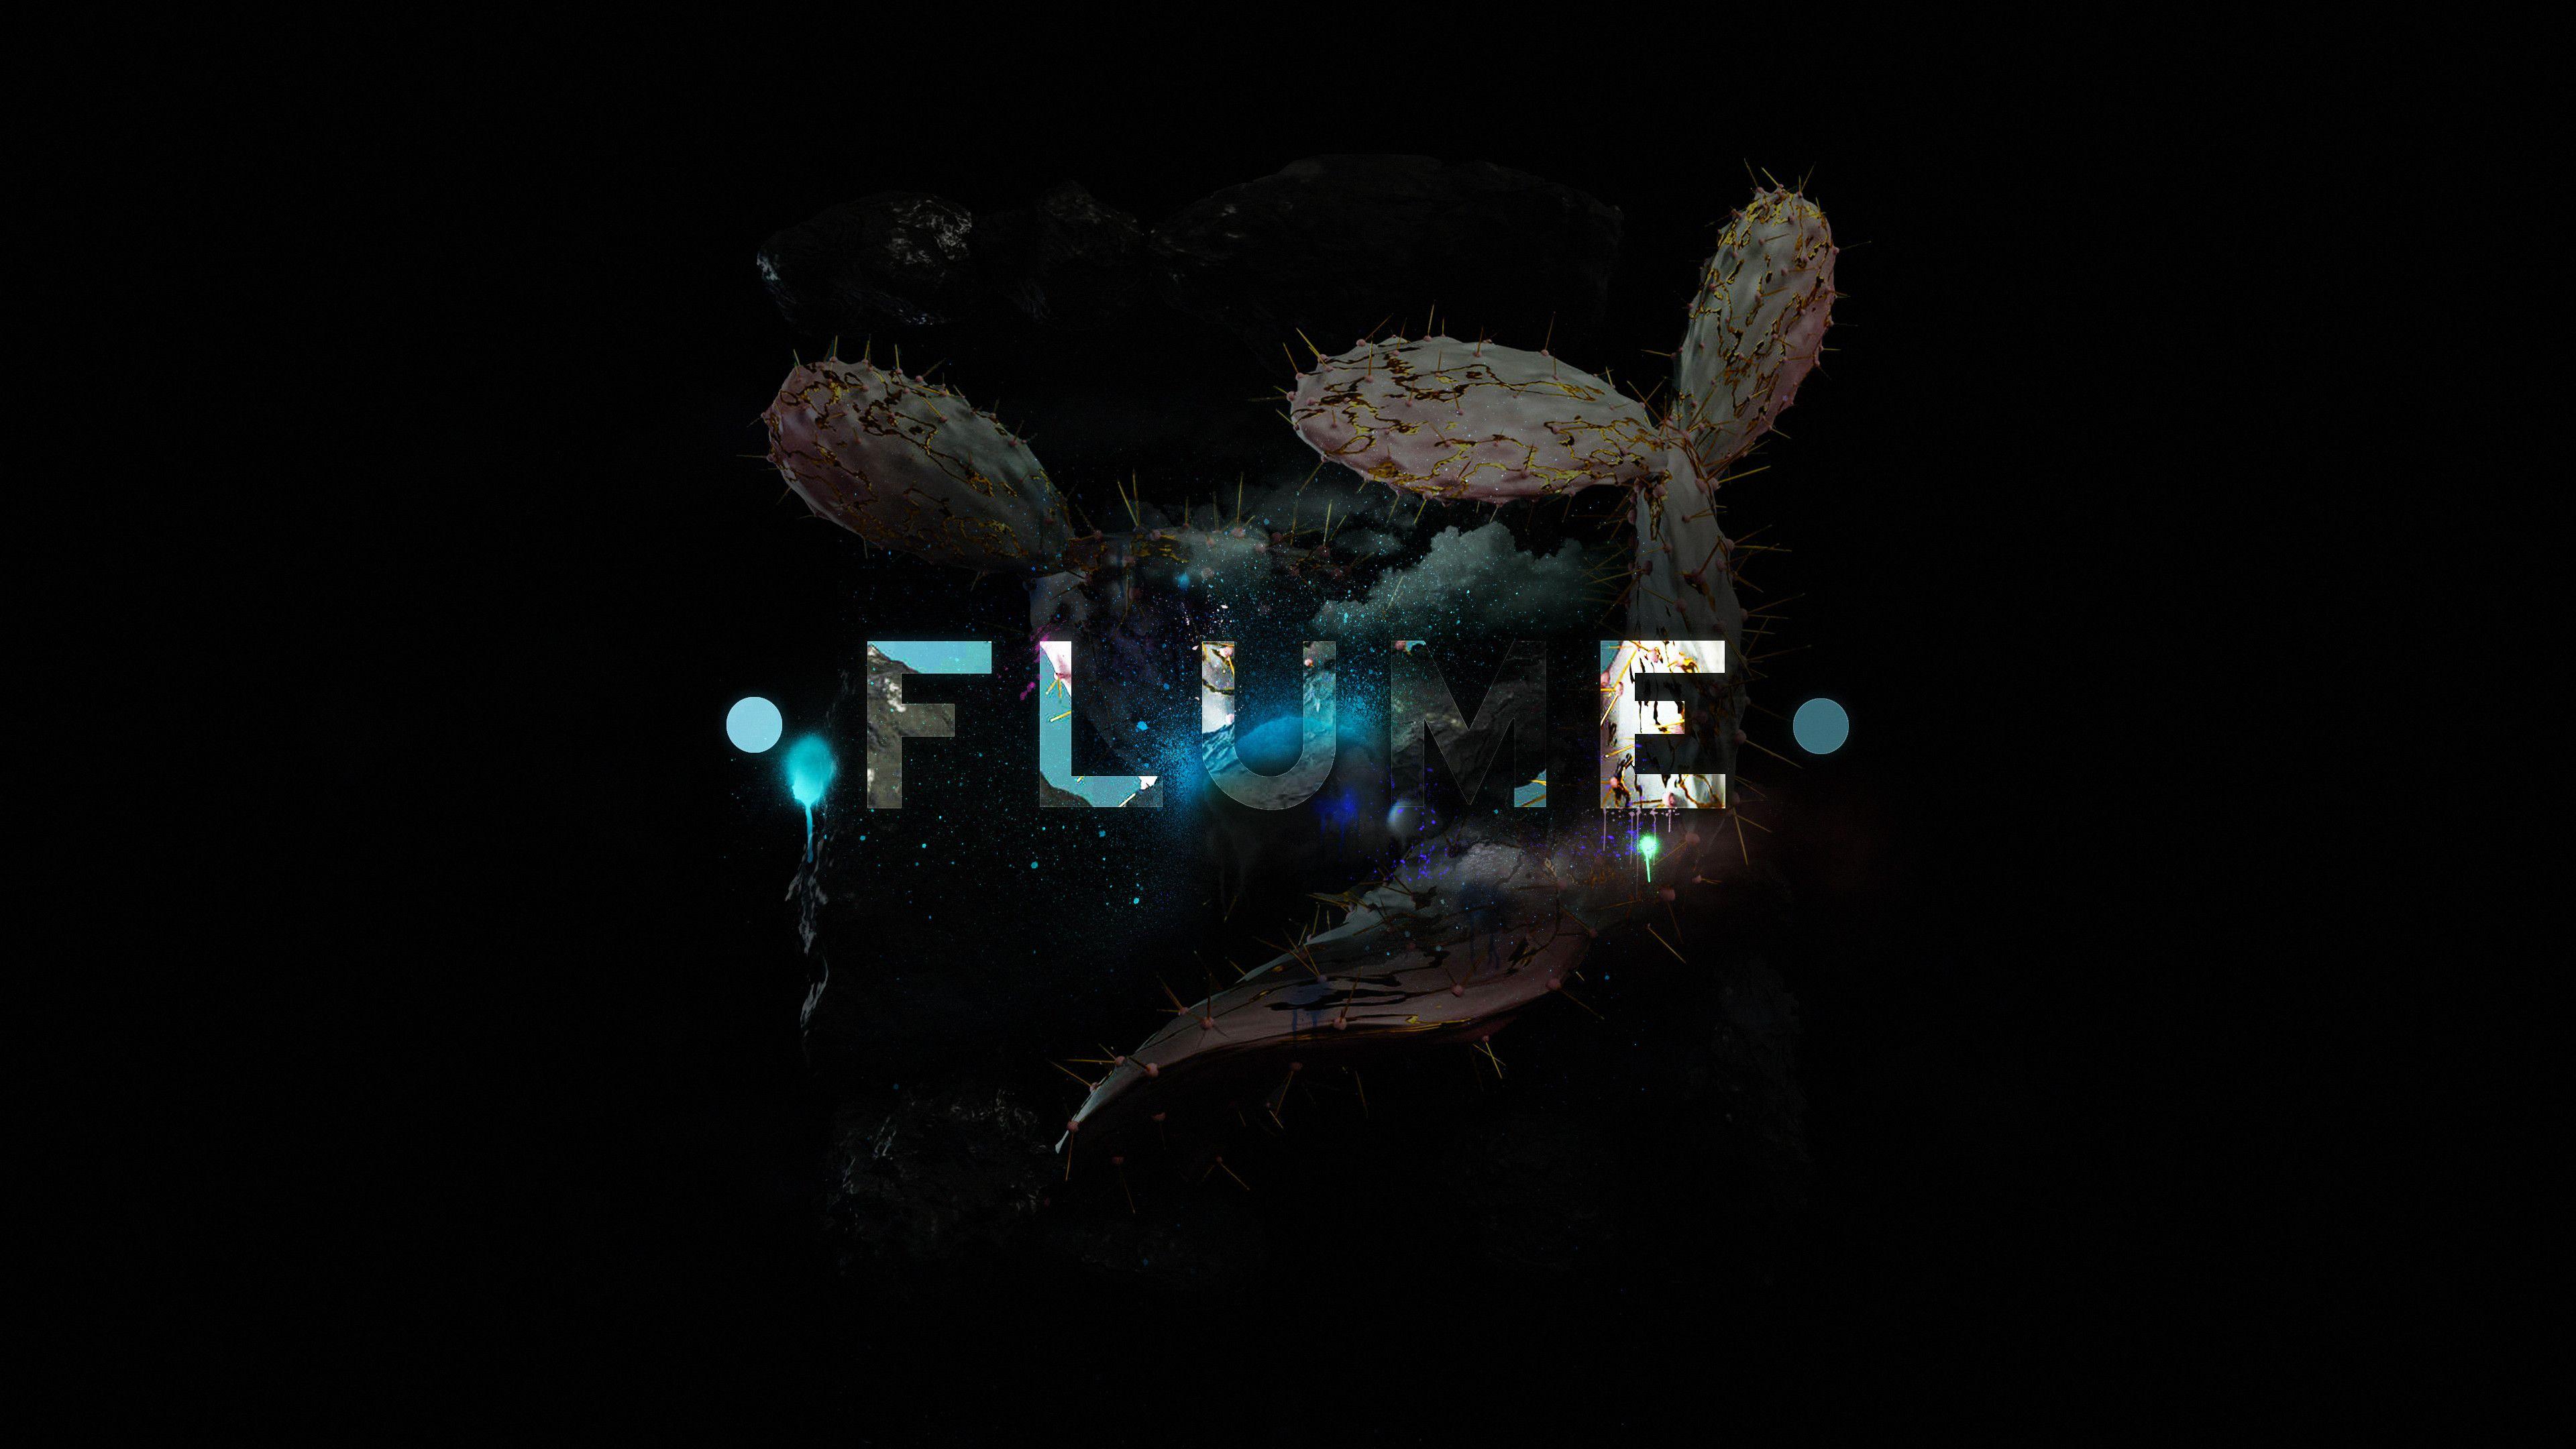 Hi This Is Flume  Stills Photography on Behance